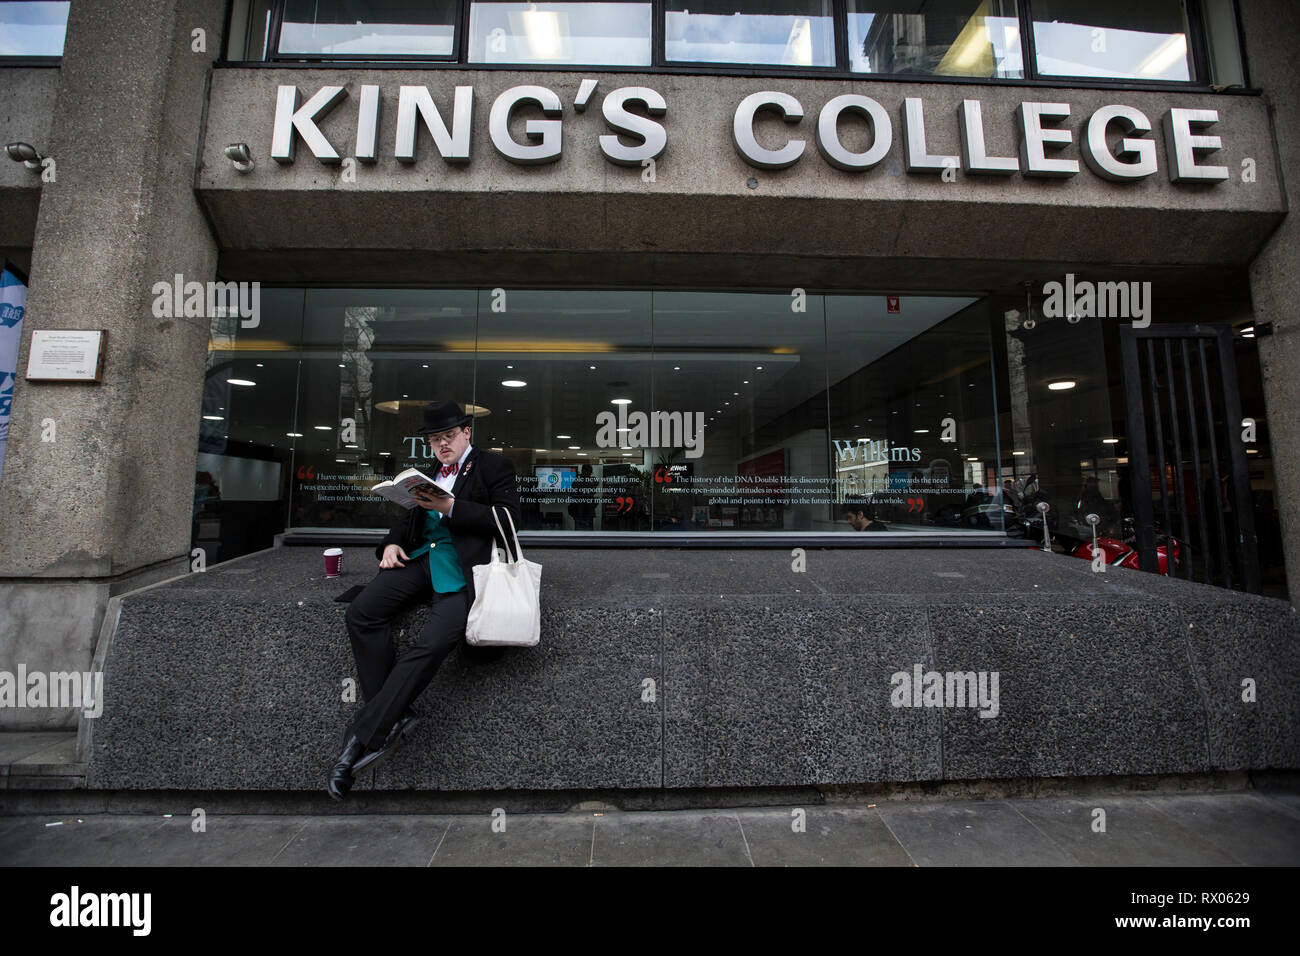 A smartly dressed student sitting on a wall of the facade of King's College Strand Campus, King's College London, England, UK Stock Photo